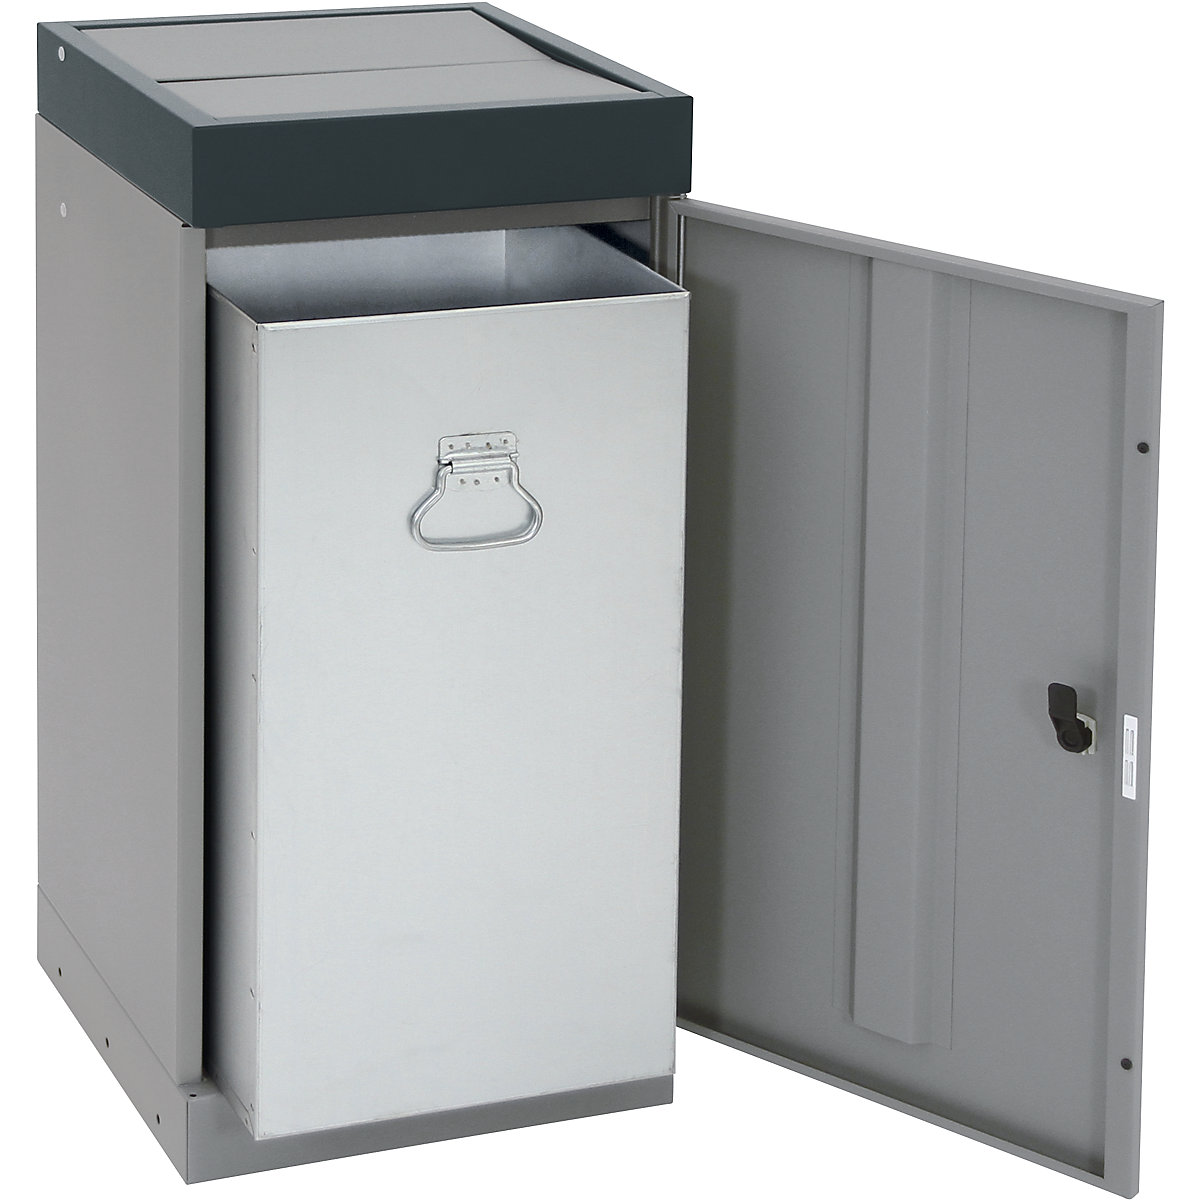 Recyclable waste collector with swing lid, individual unit, capacity 70 l, lid colour grey / white aluminium-11